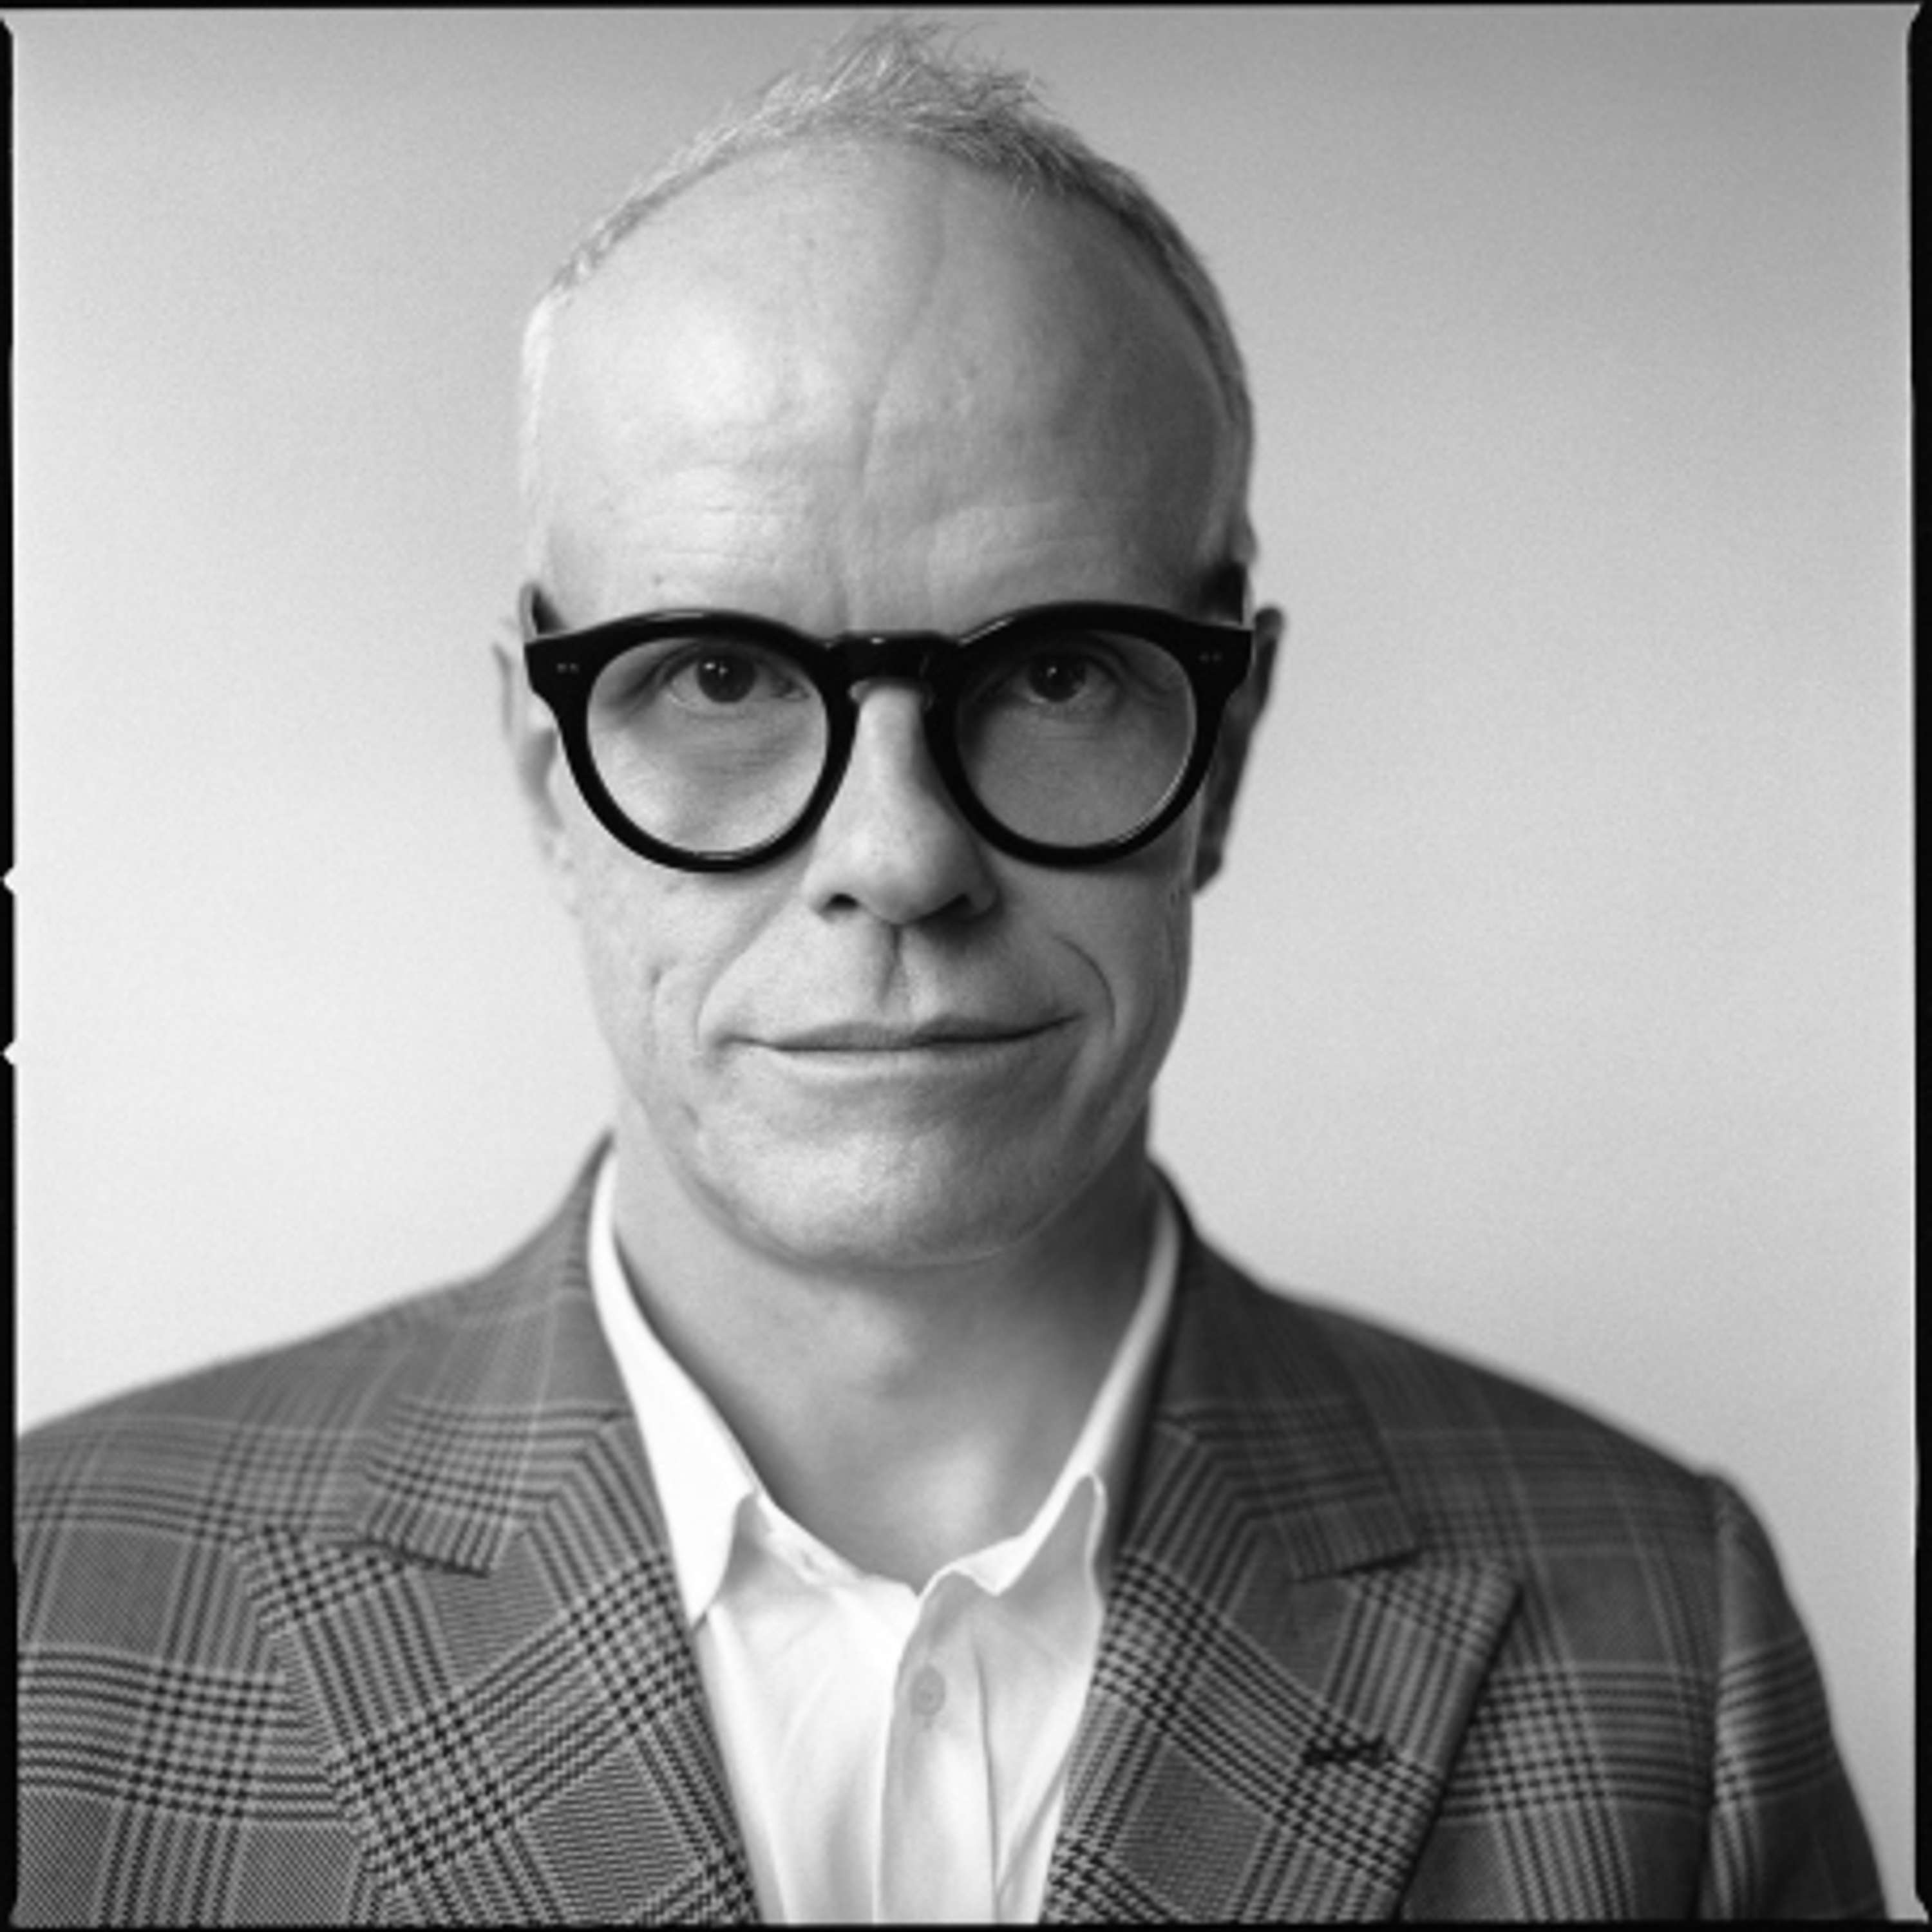 Episode 155: Art curator and critic Hans Ulrich Obrist discusses the role of art in climate communications and activism